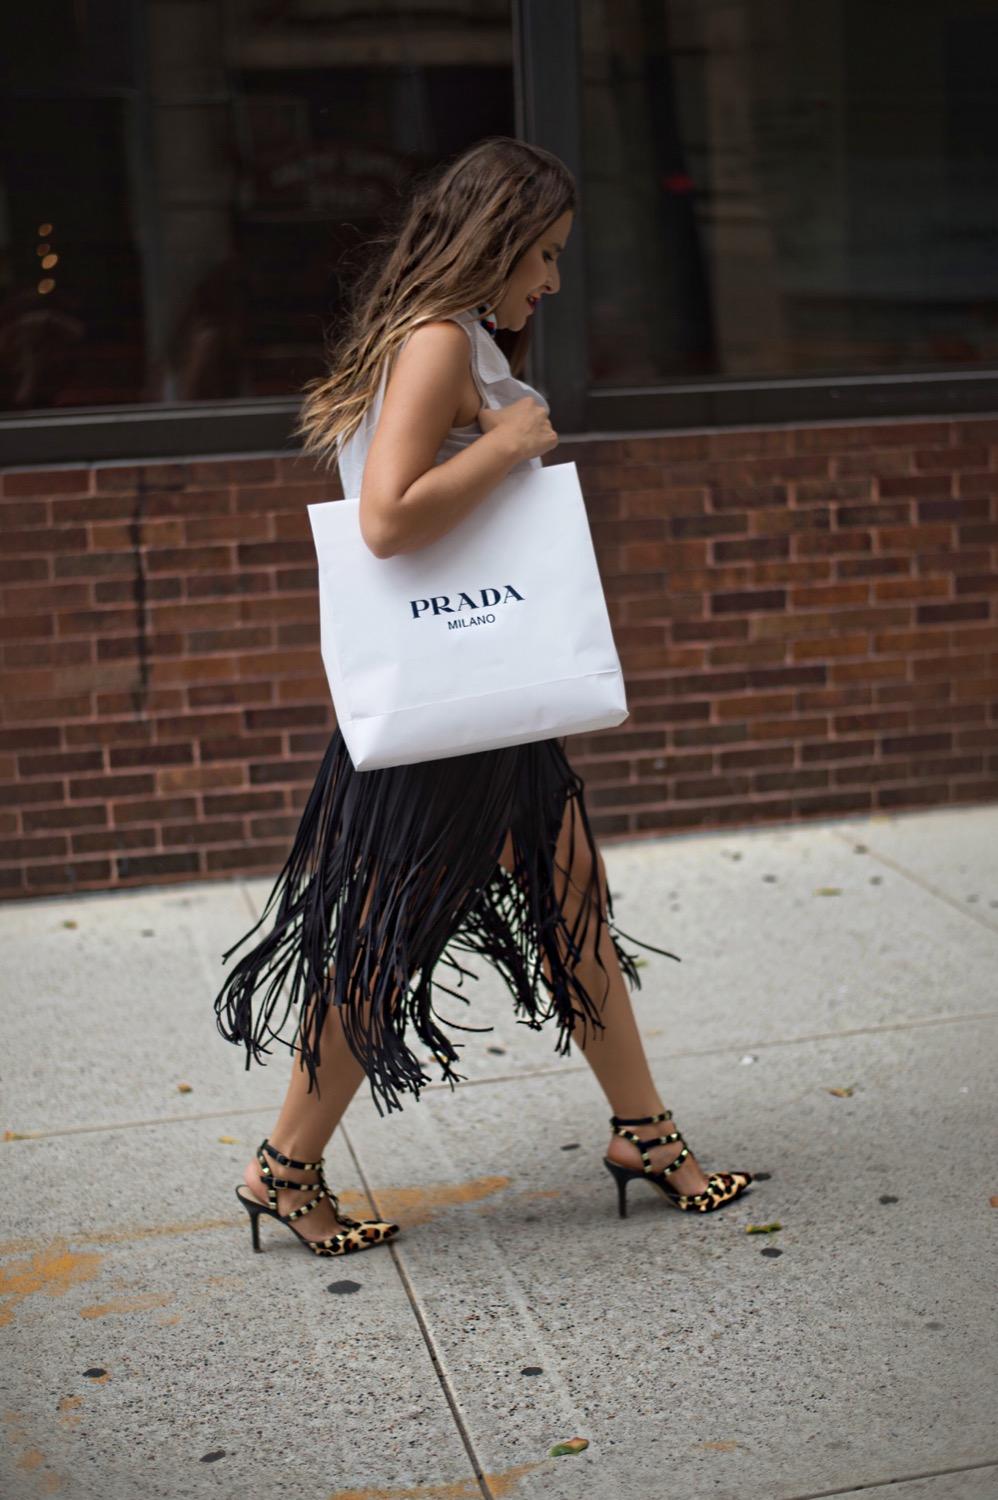 Prada Cleo Bag Review - Is it Worth the Hype? - Alley Girl Blog